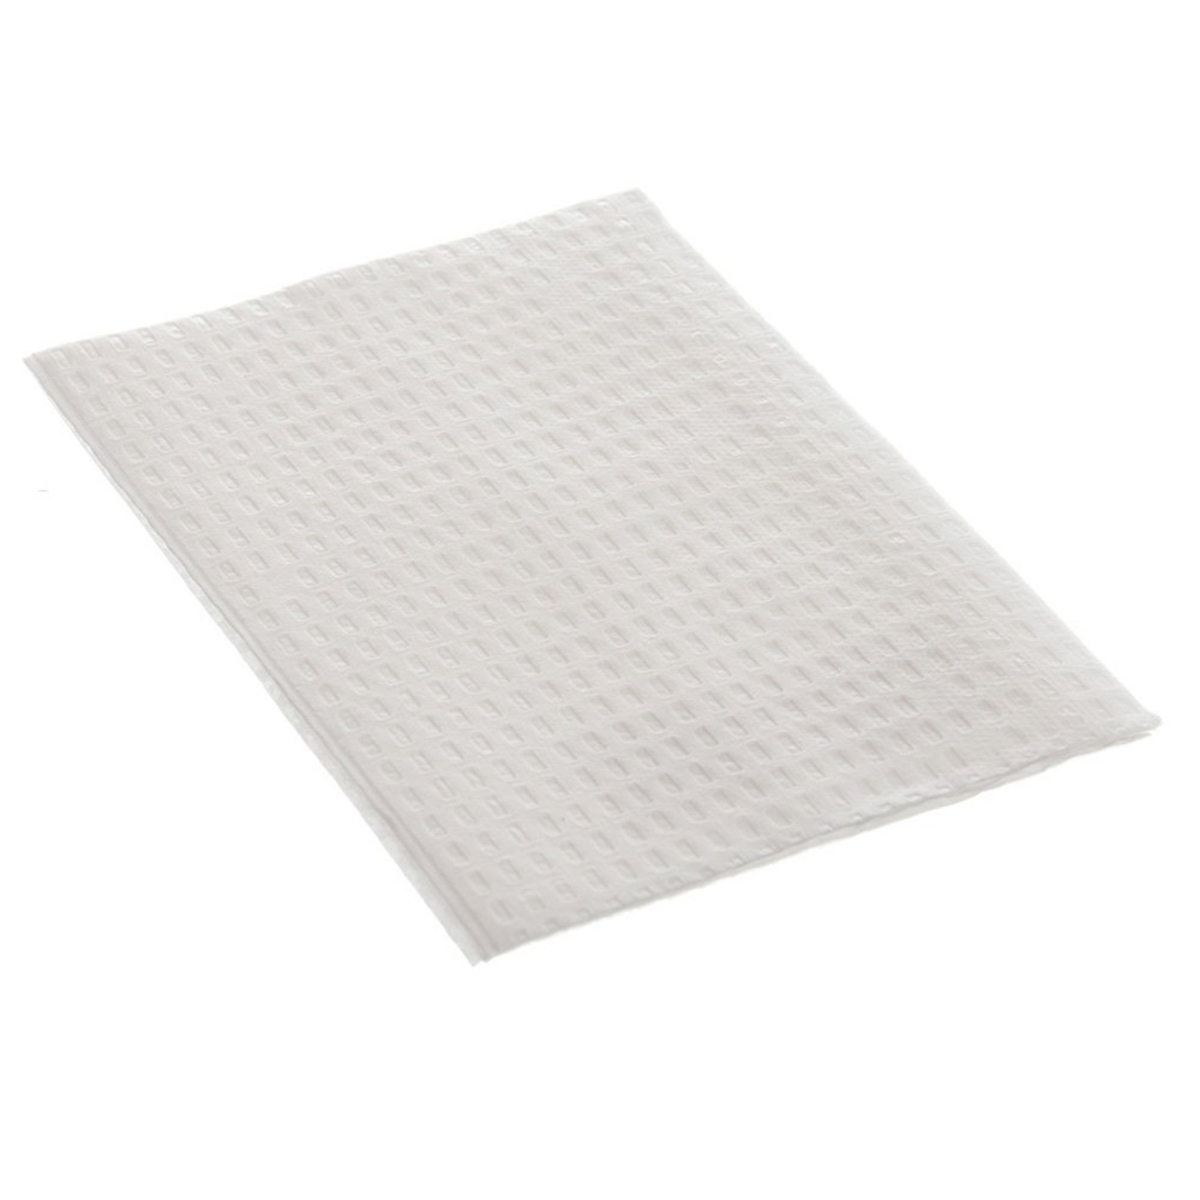 Picture of Tidi Choice 959352-CS 13 x 18 in. White Procedure Towel, Pack of 500